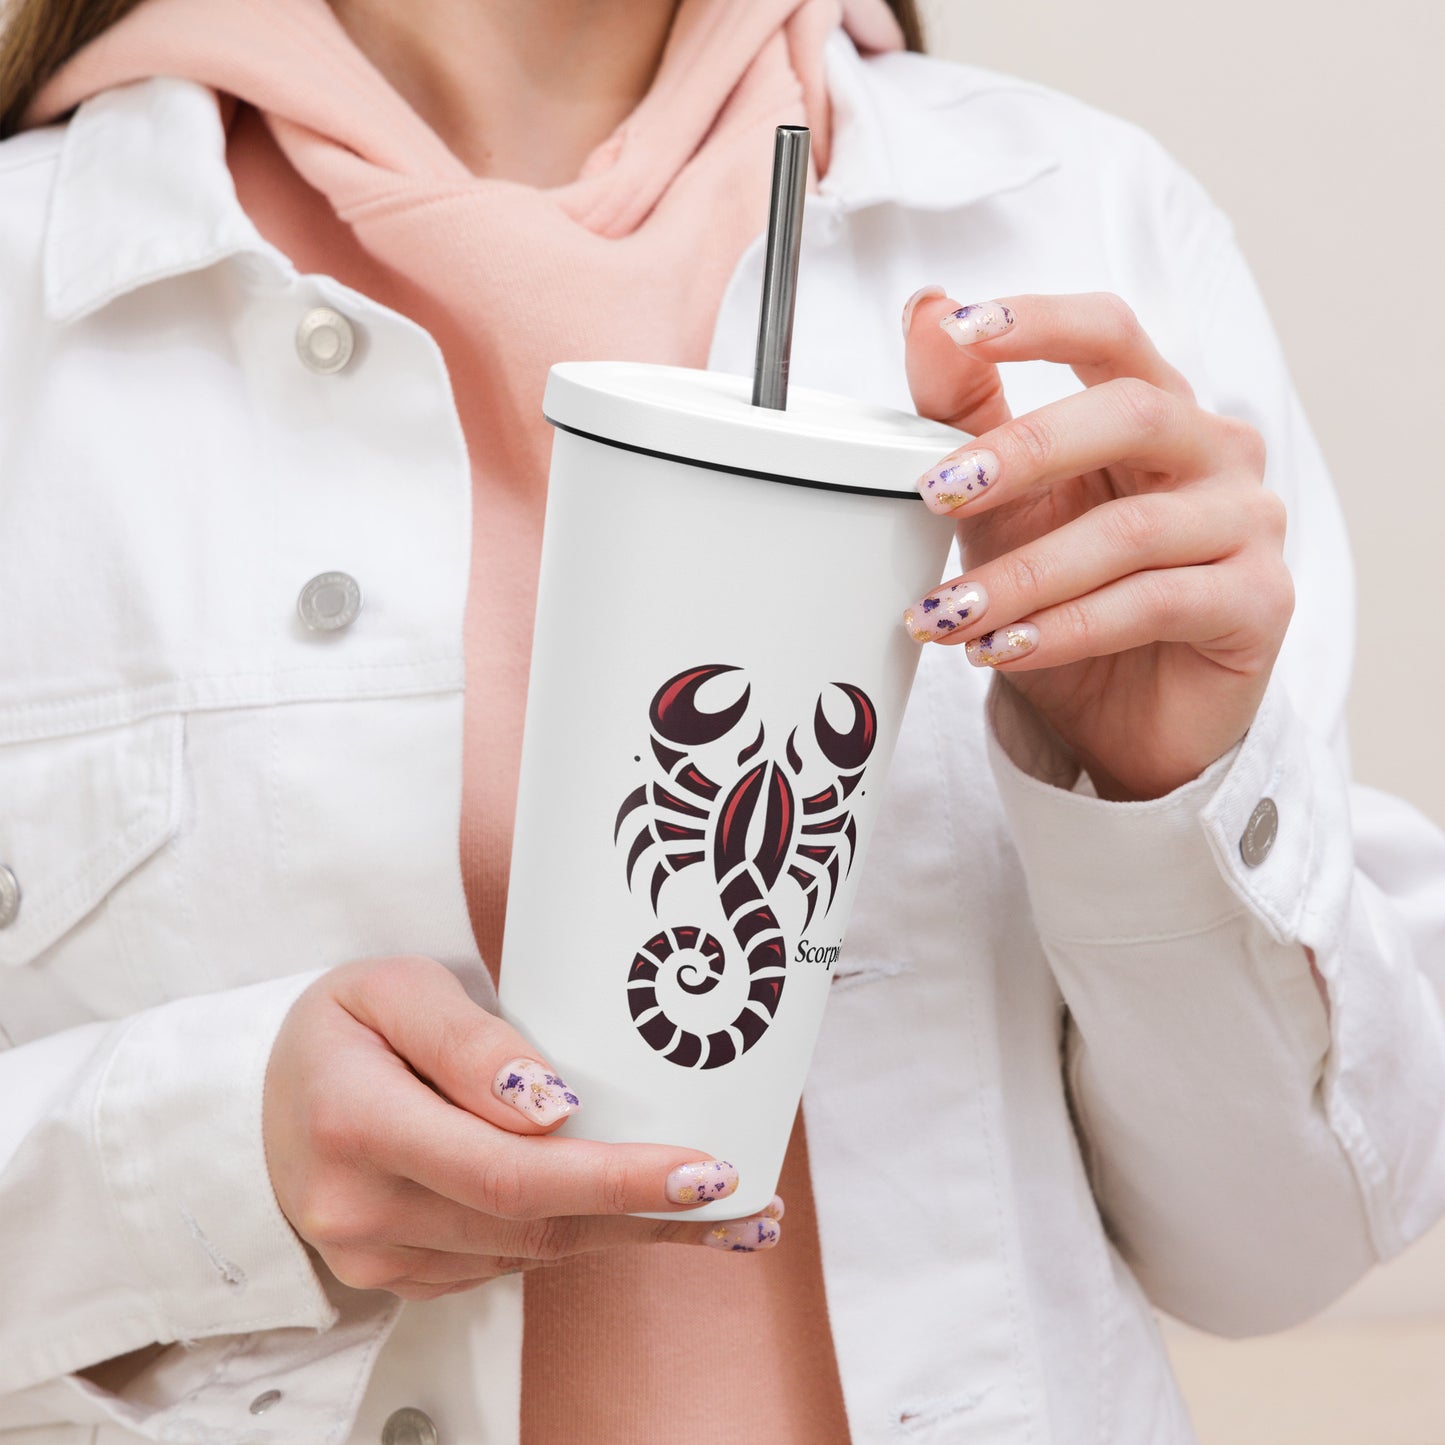 Scorpio Insulated tumbler with a straw